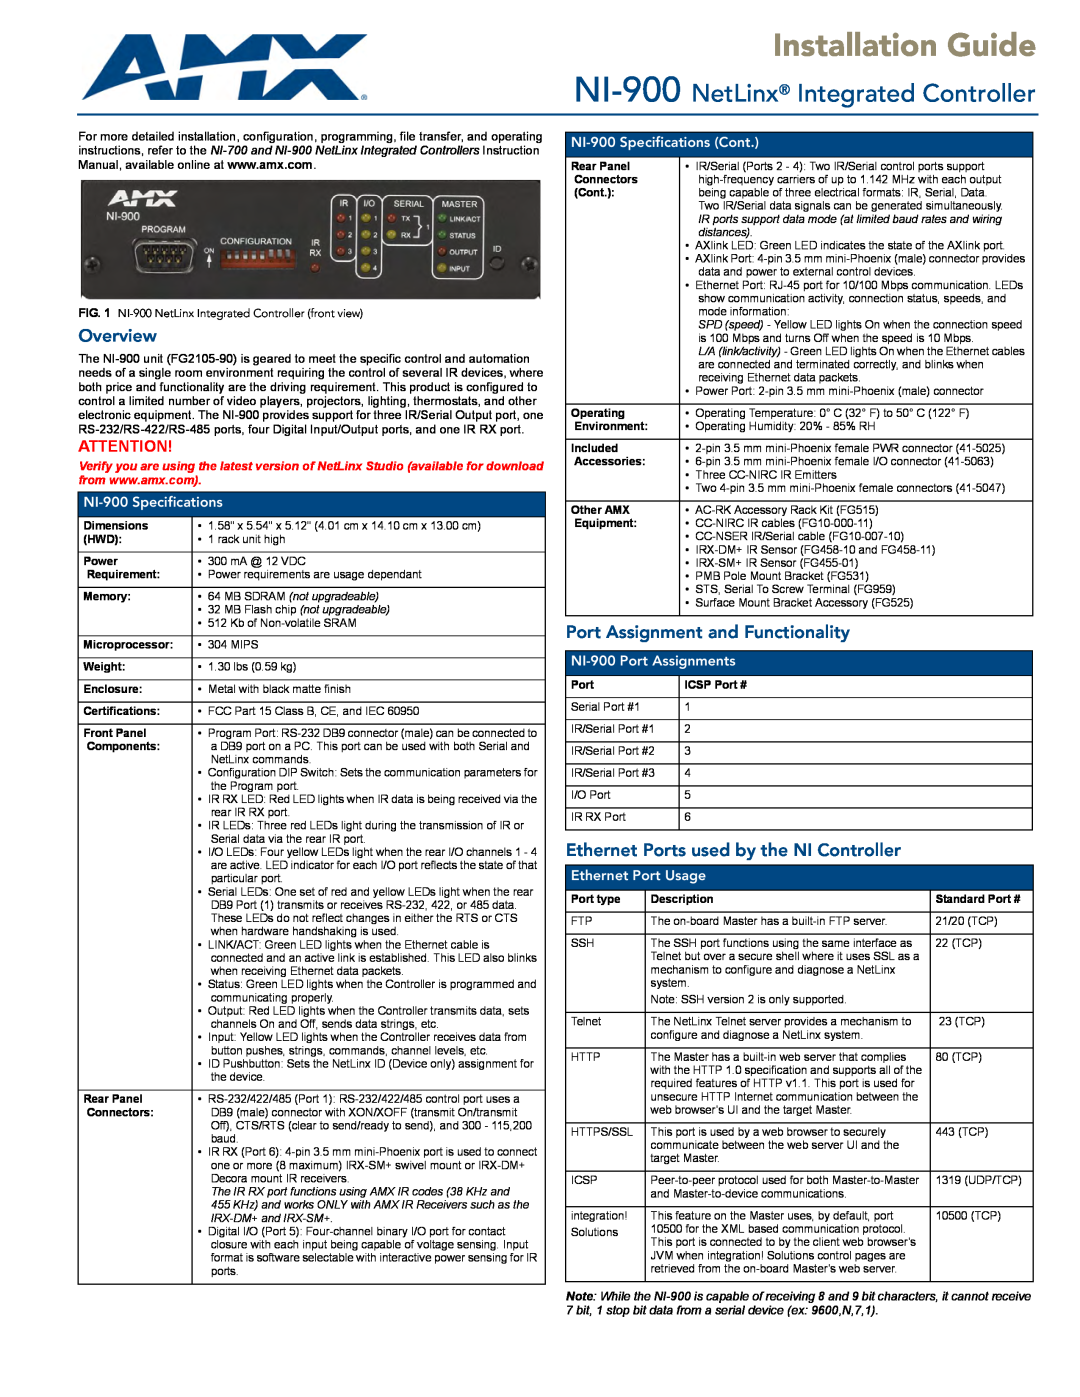 AMX NI-900 specifications Overview, Port Assignment and Functionality, Ethernet Ports used by the NI Controller 